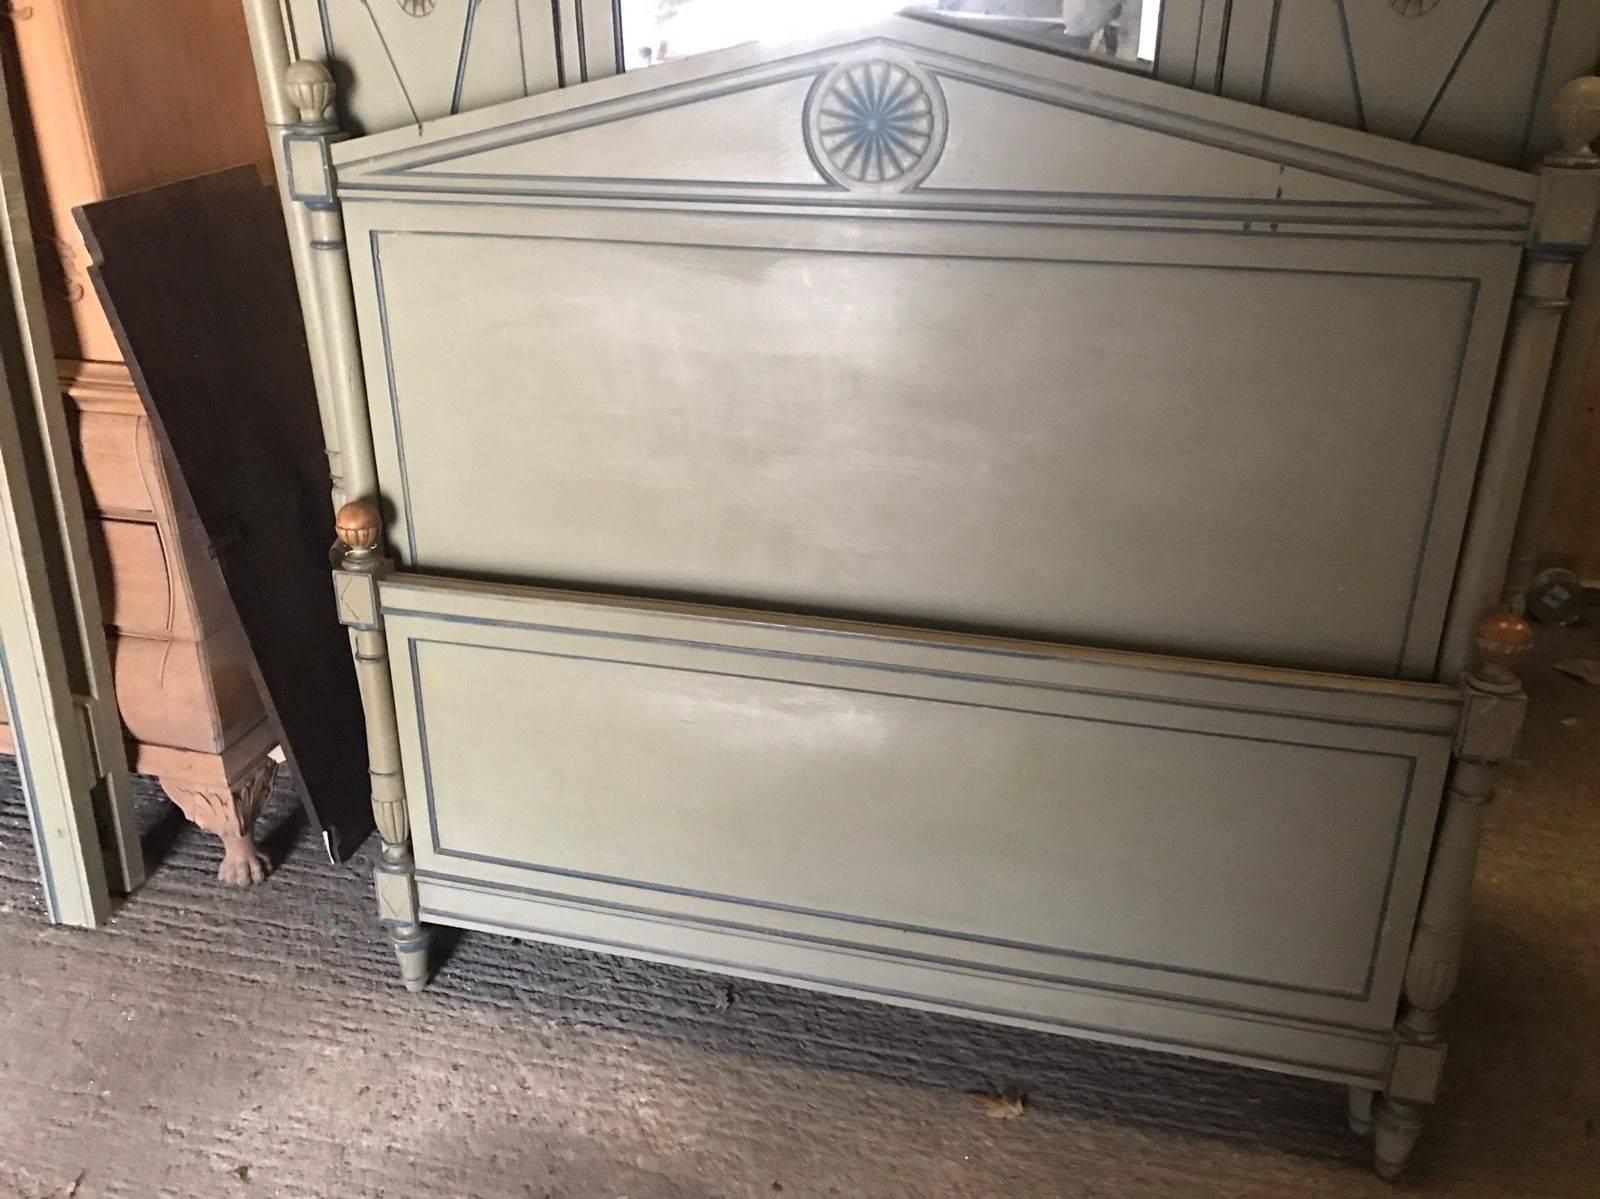  Original Napoleon french armoire with matching double bed. This came from Bordeaux in the south of France.

Splits down in to sections for ease of transportation. All complete, internally there is a few shelves and hanging space. Mirror on the